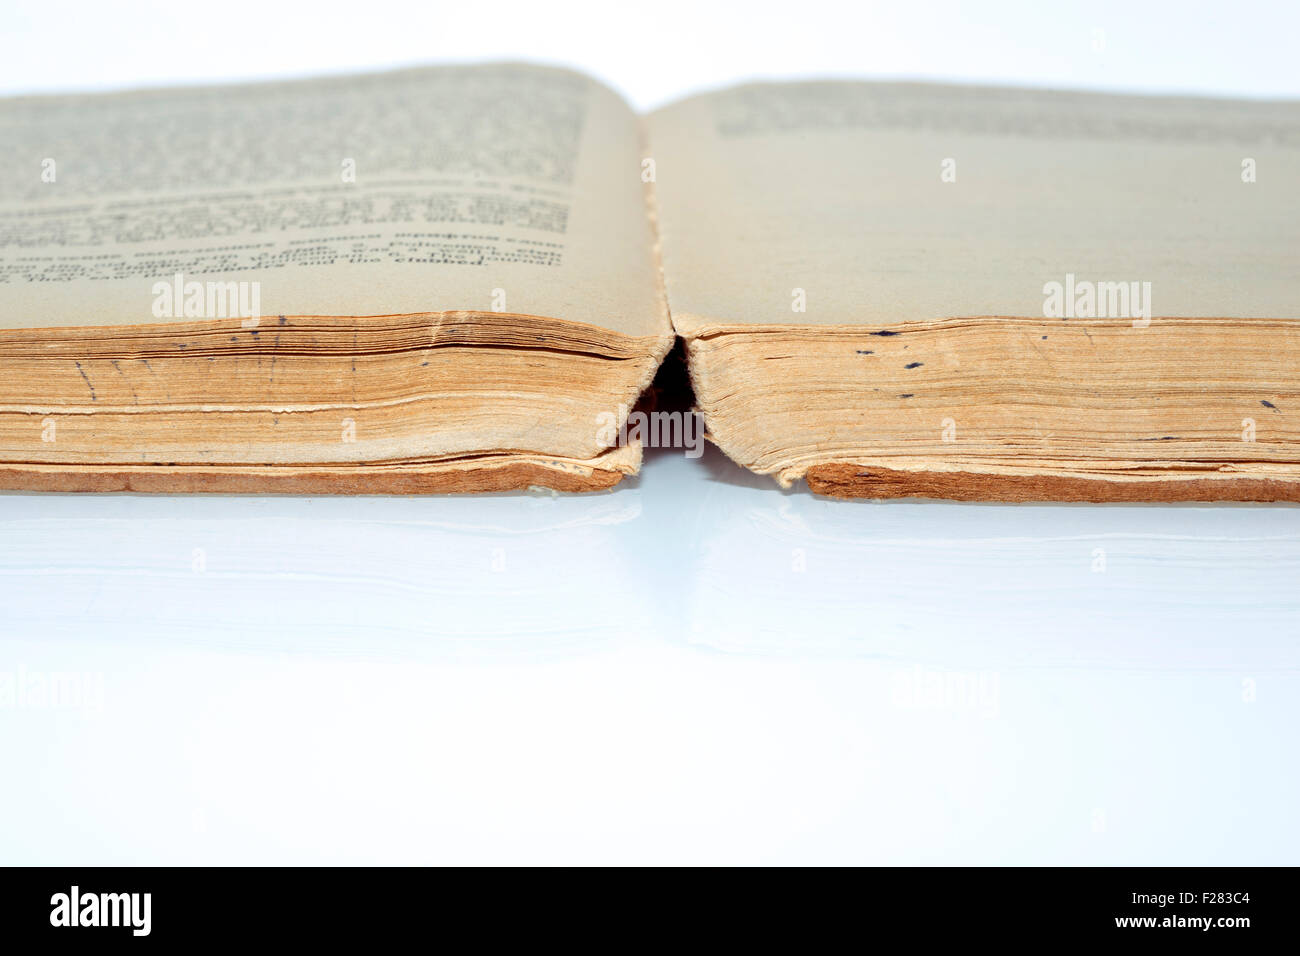 yellowish ancient book open on the white reflective surface Stock Photo